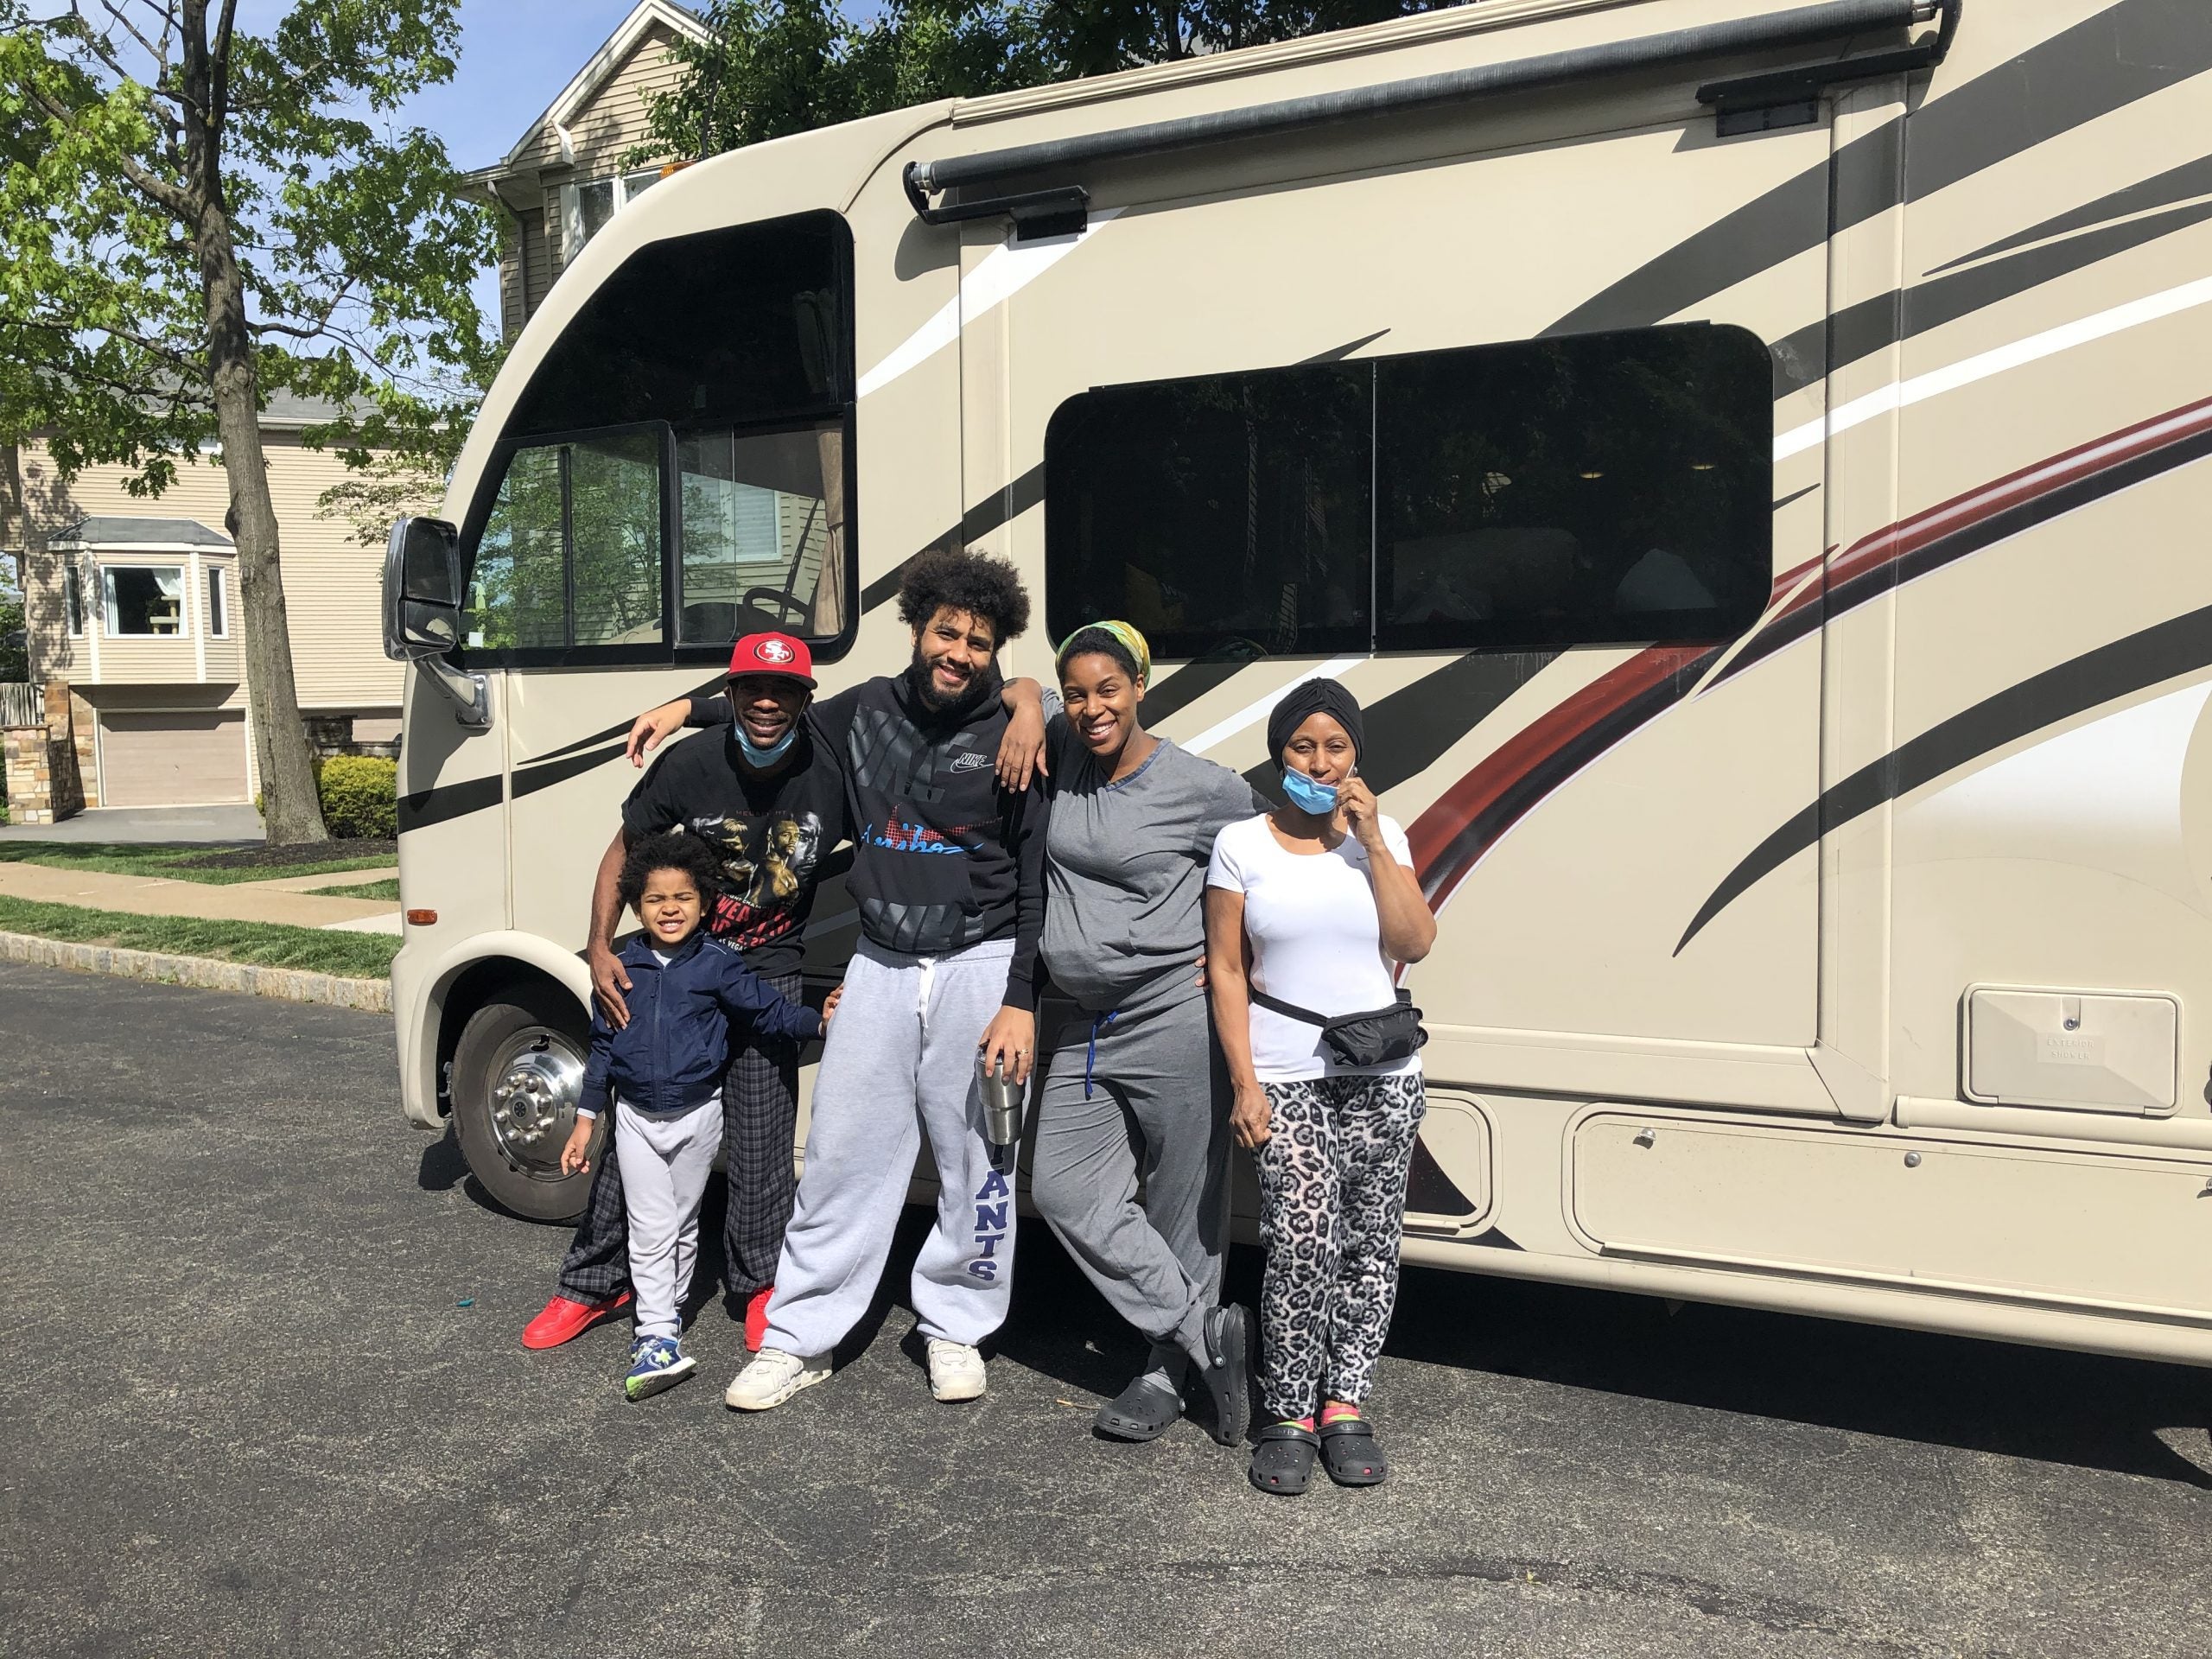 A few Things to know about Travelling in a Rv as African-Americans